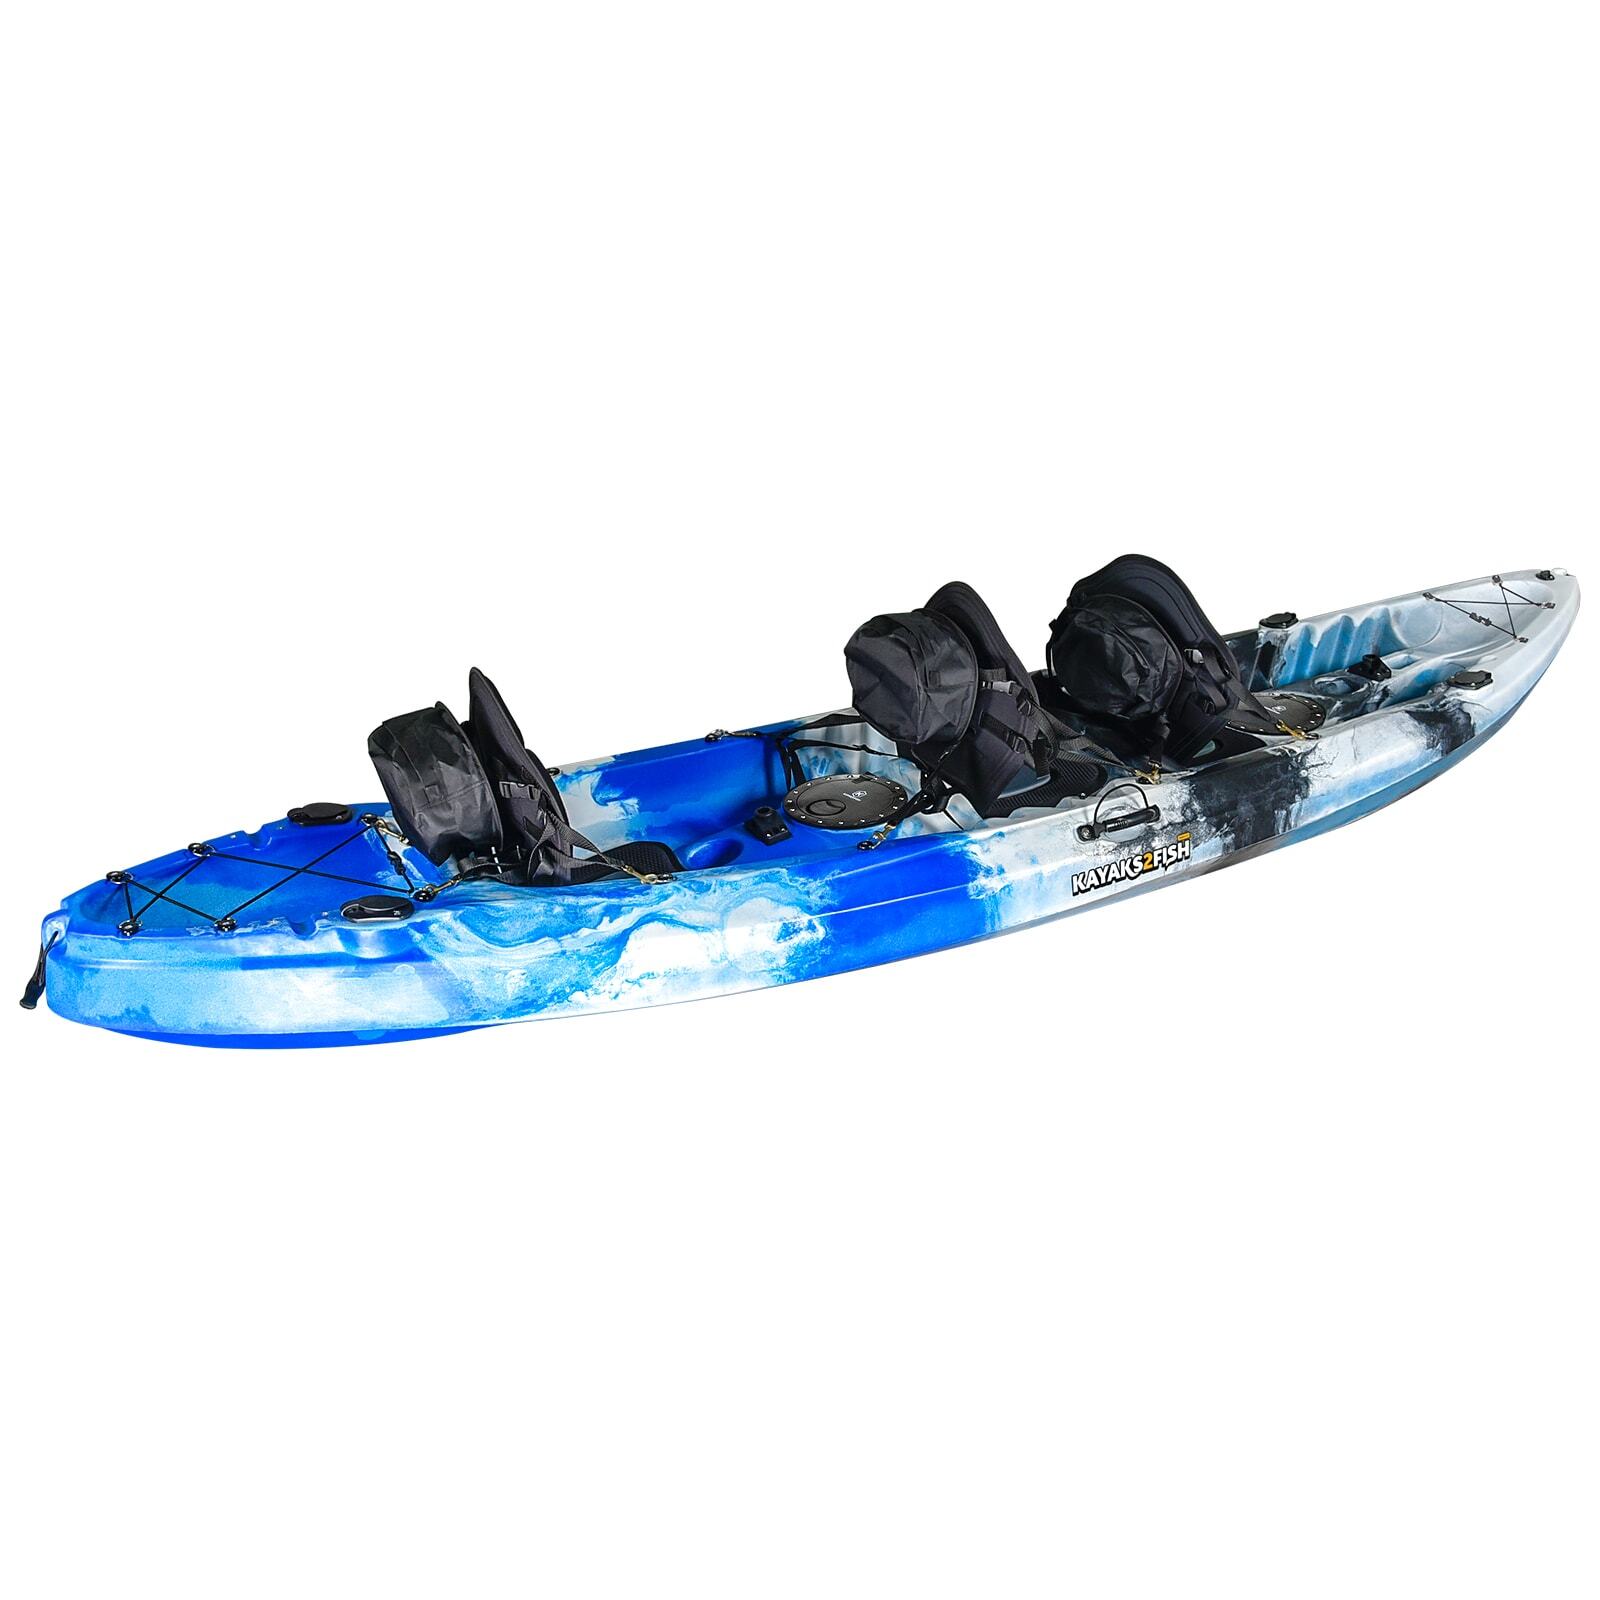 Eagle Double Fishing Kayak Package - Blue Camo [Melbourne]